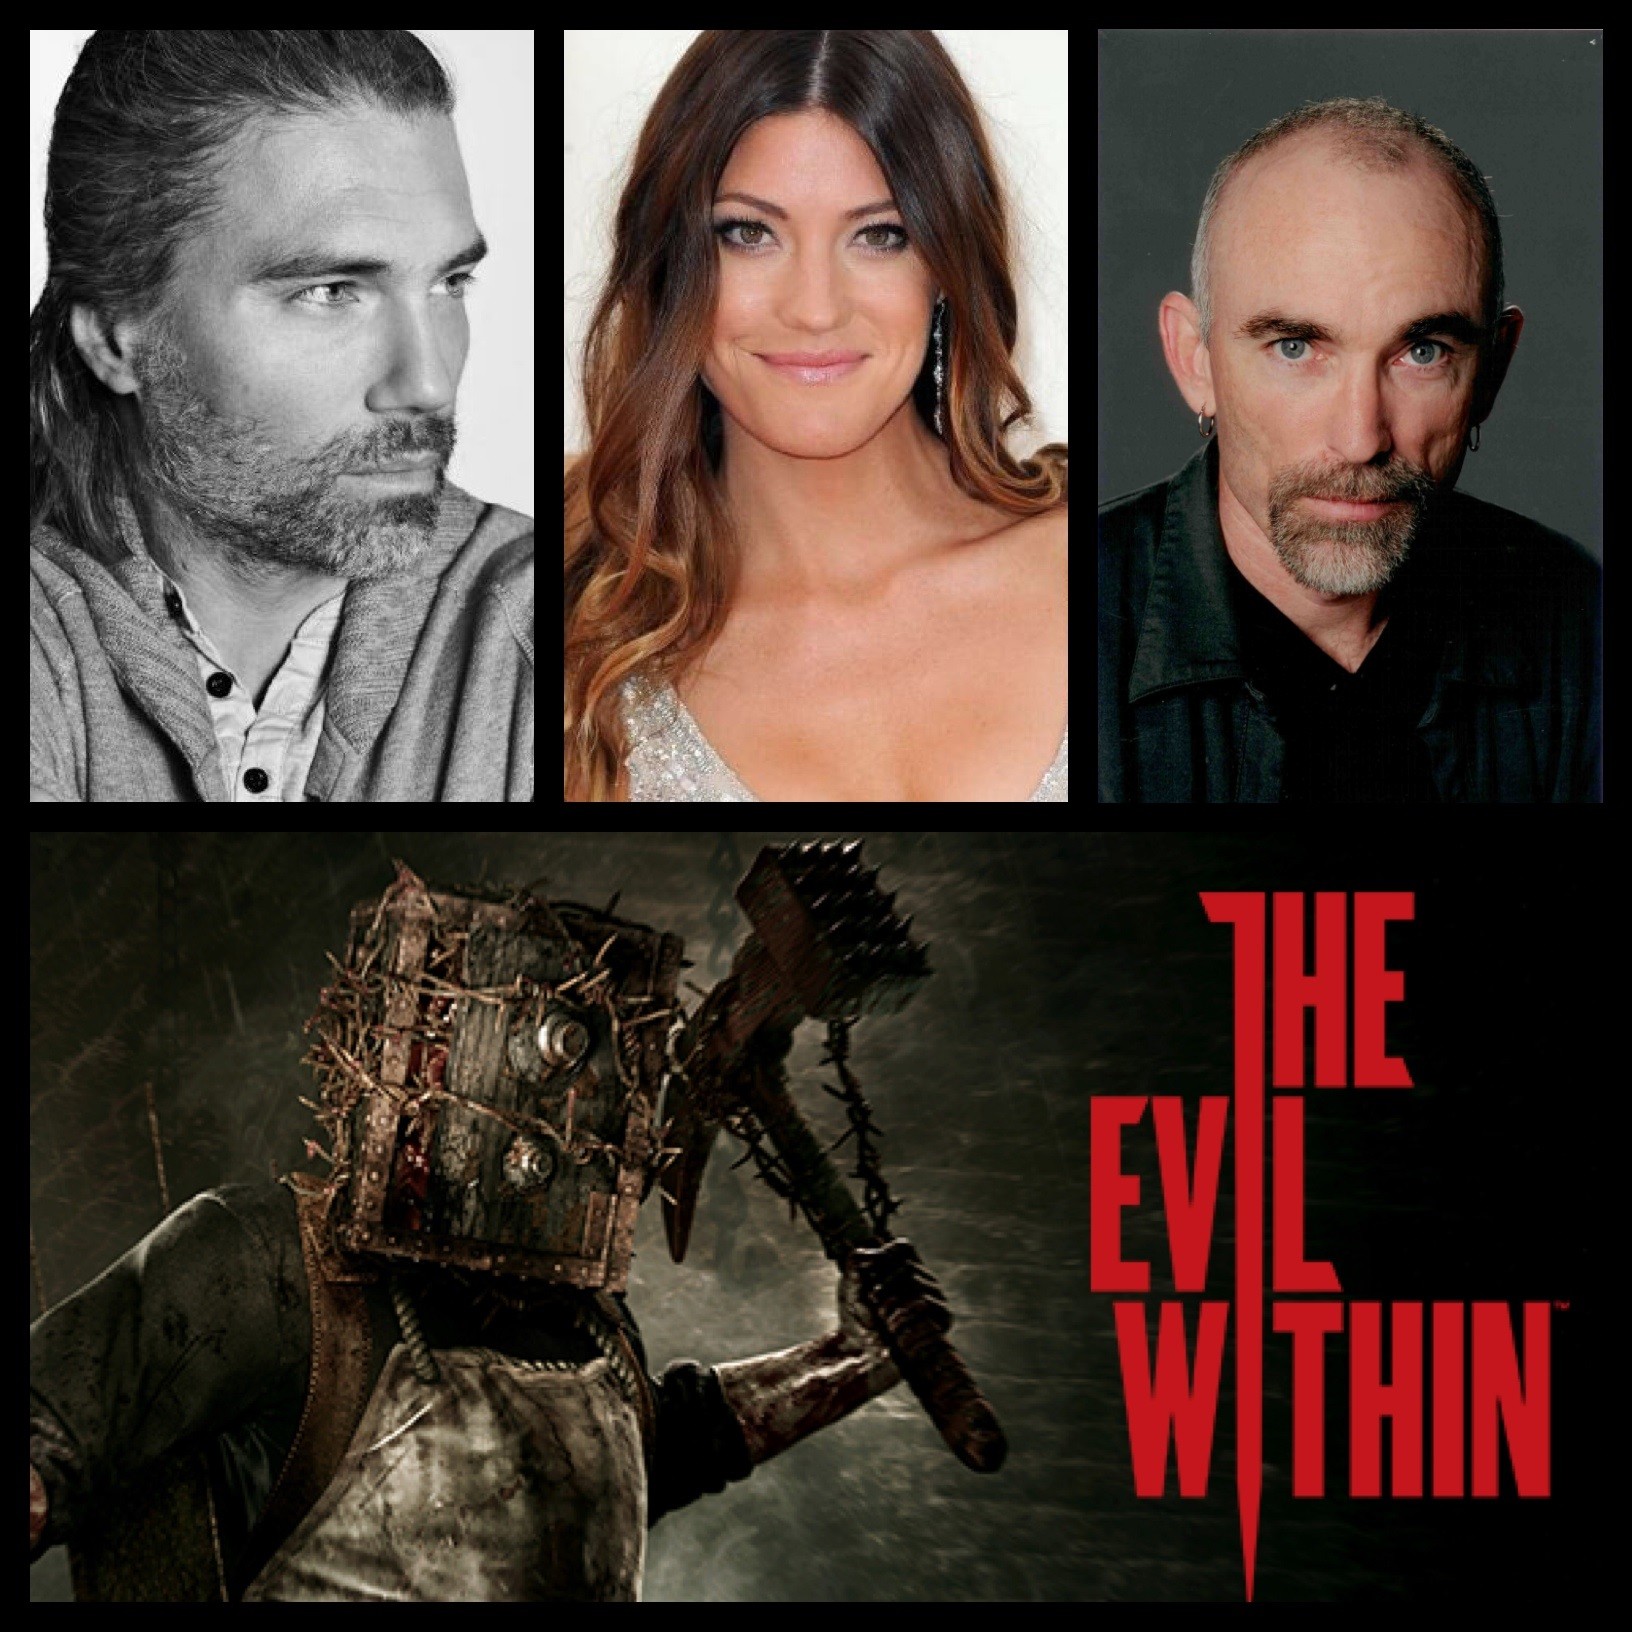 The-Evil-Within-Voice-Actors-Include-Anson-Mount-Jackie-Earle-Haley-More-Video-456482-2.jpg